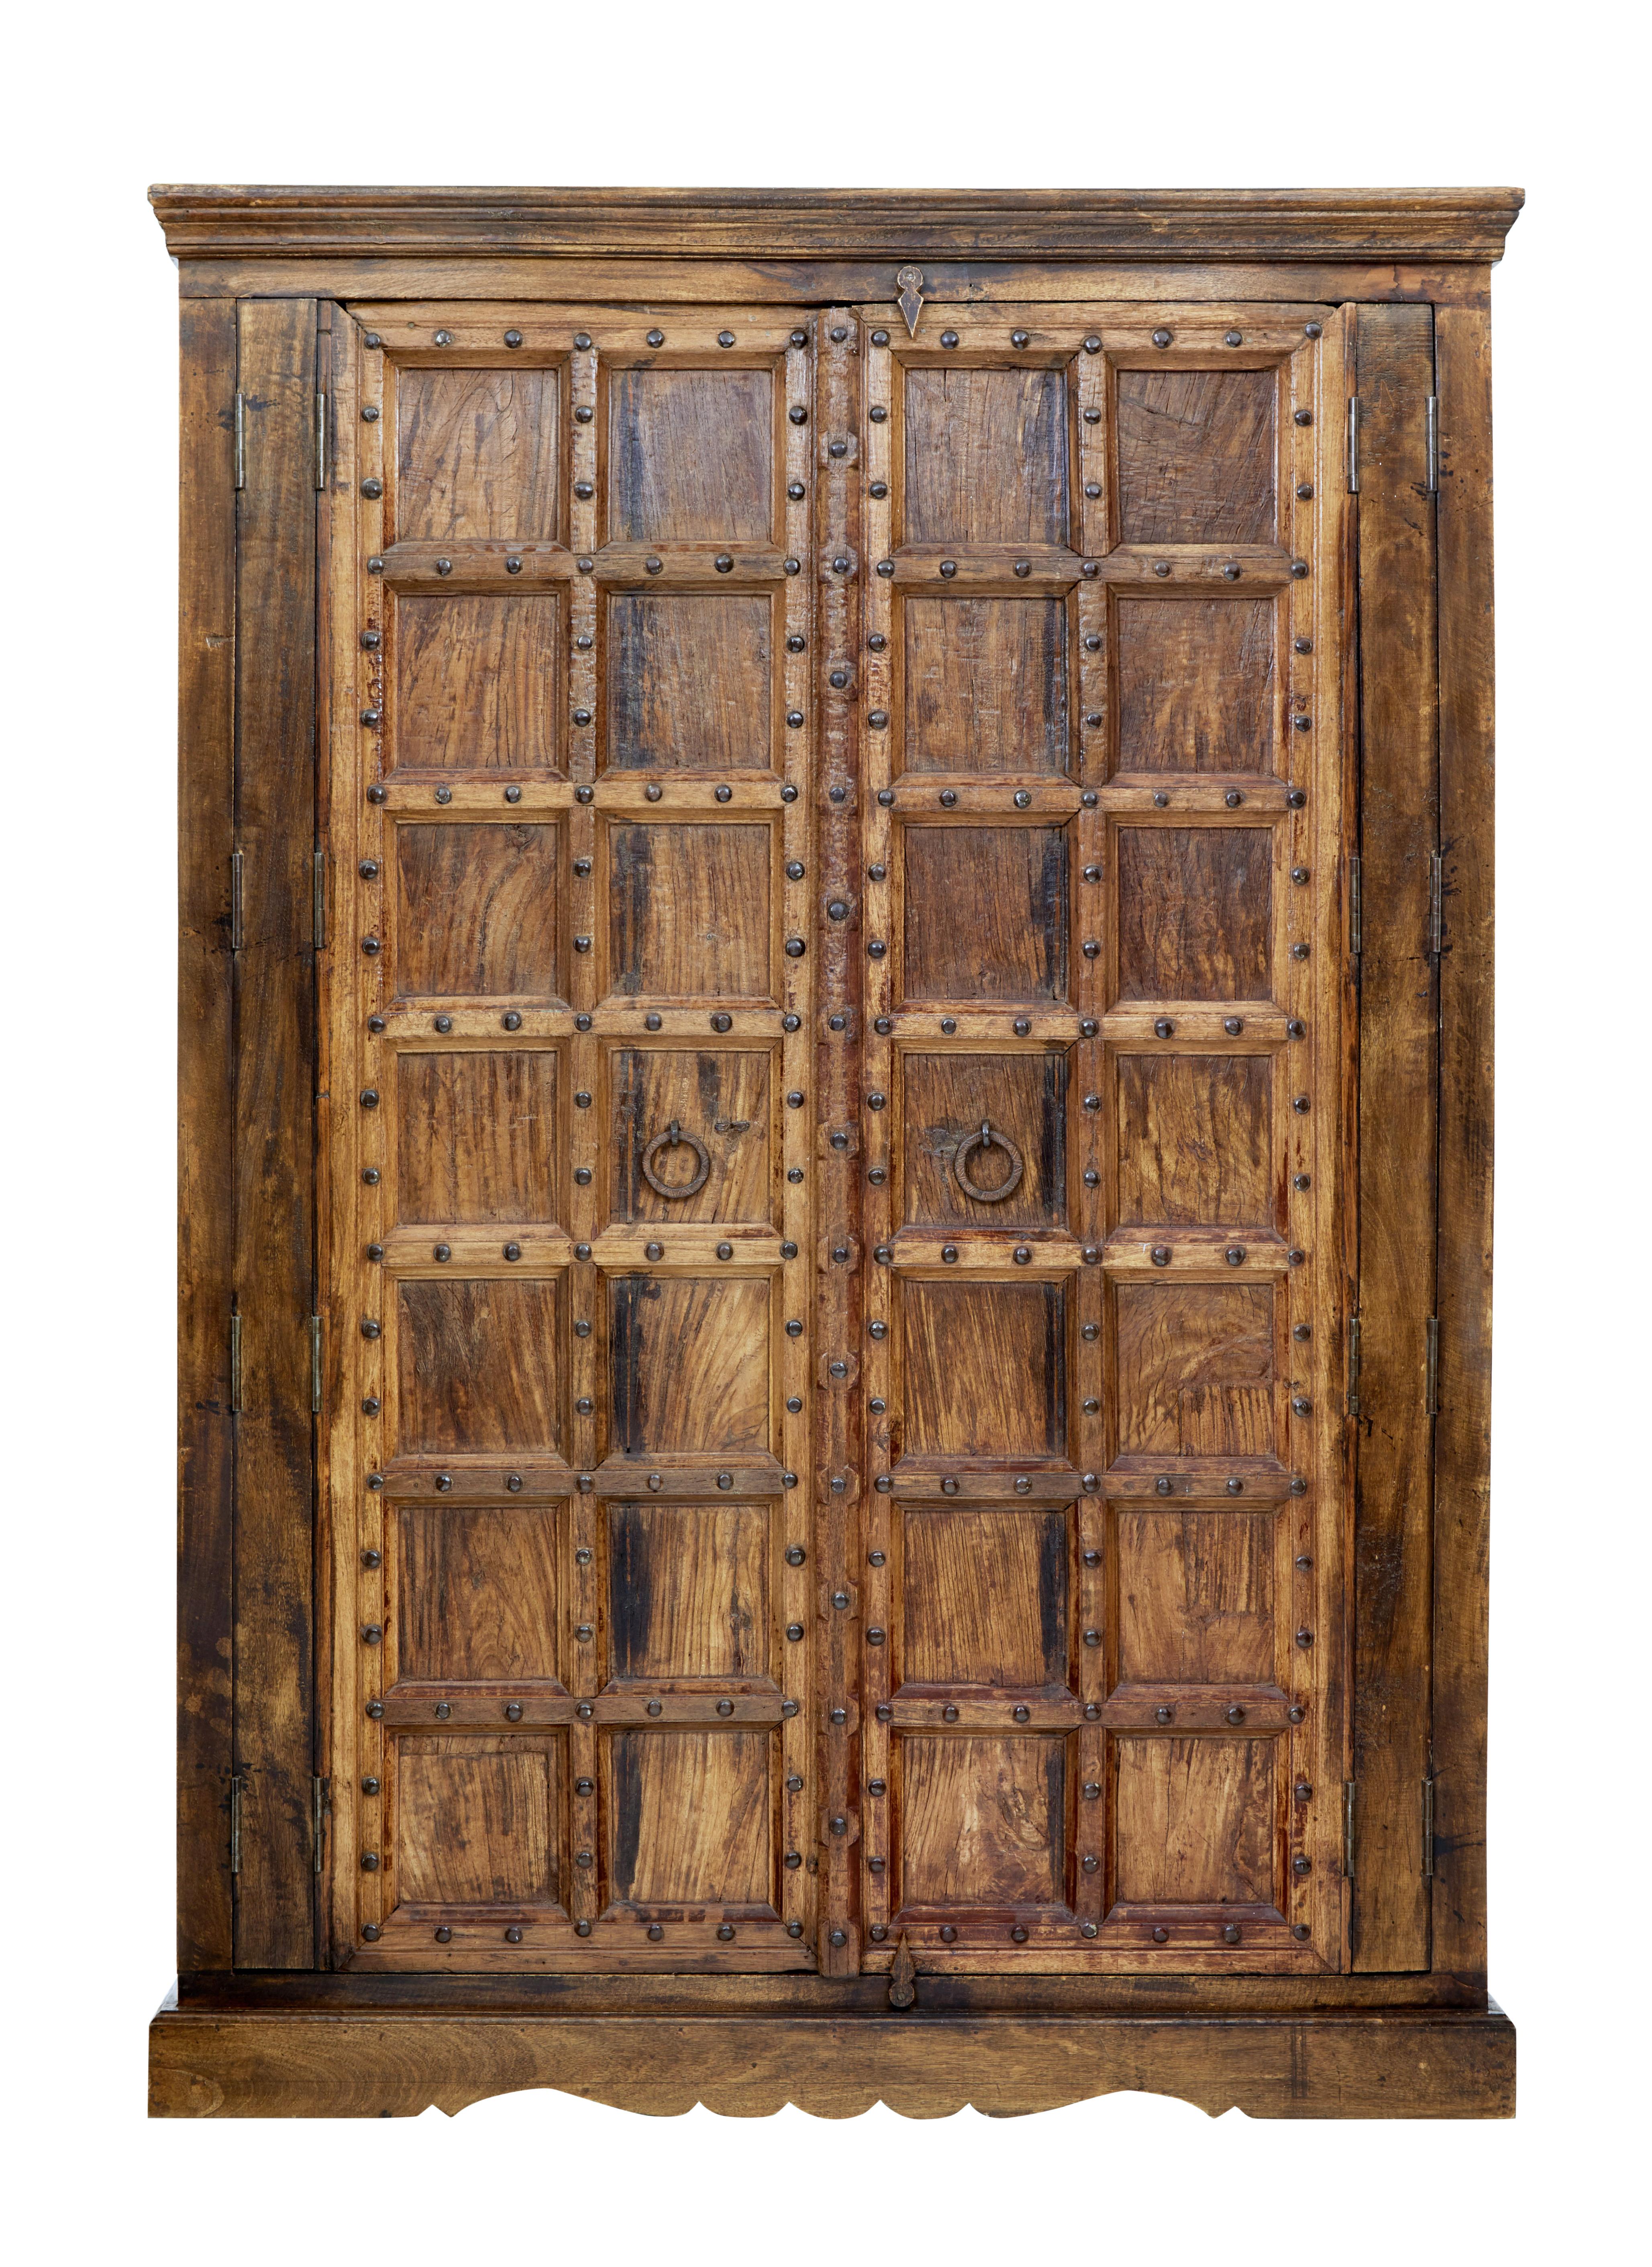 Beautiful imposing hardwood wardrobe, circa 1950.

With doors dating from the early 19th century this creates this atomospheric piece.

Heavy panelled doors with metal studwork and handles, opens to a two thirds hanging rail space and a 1 third